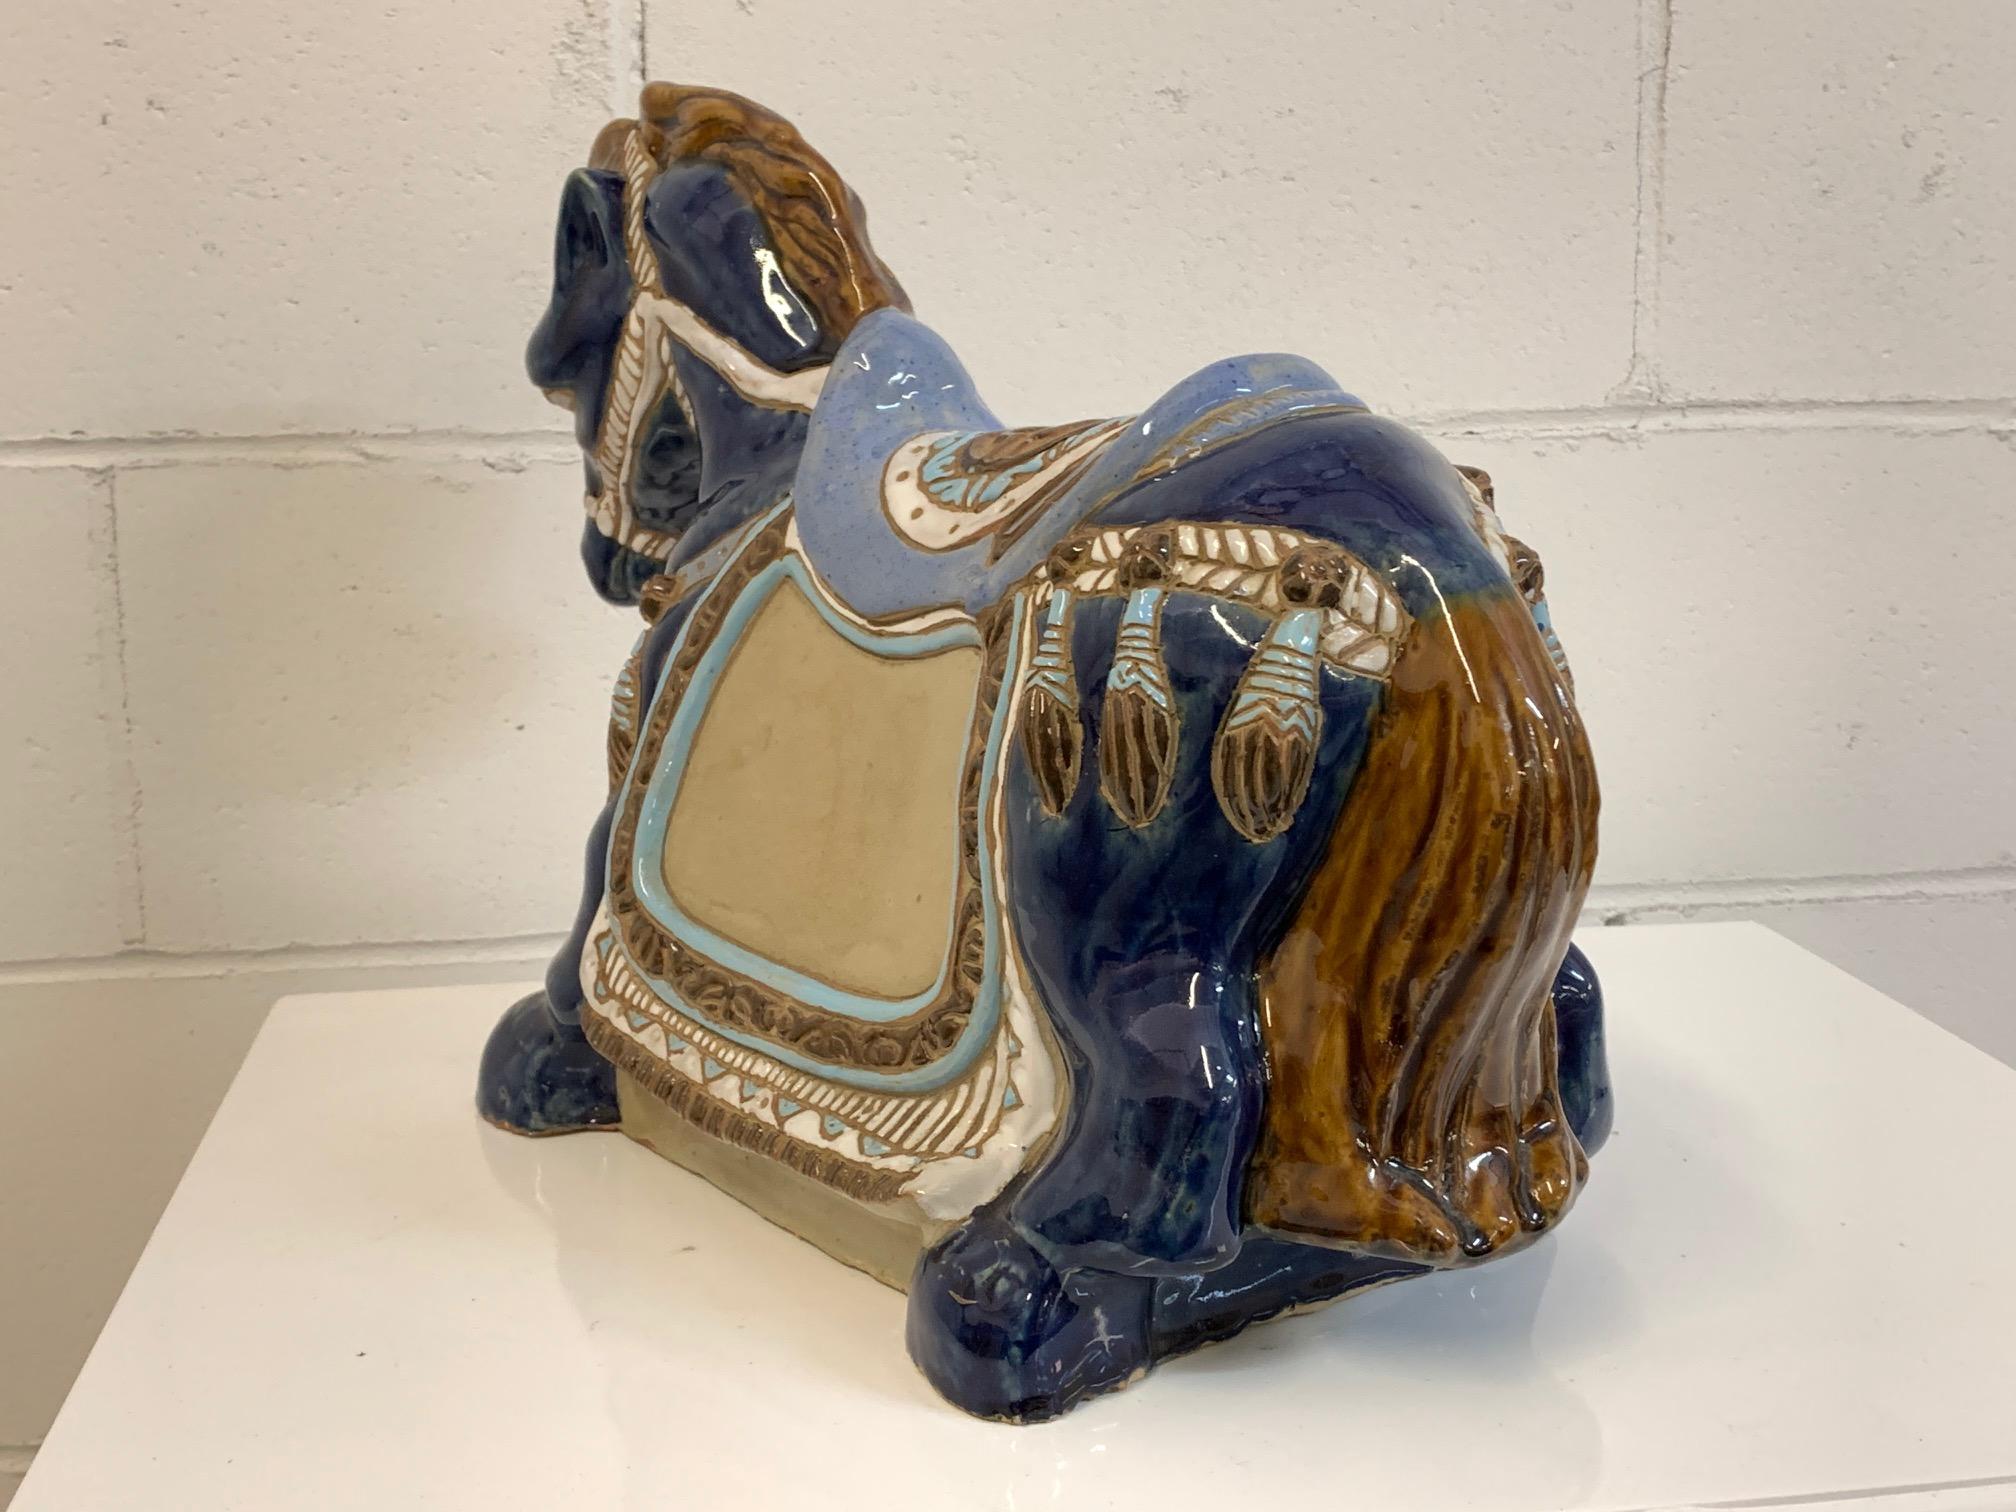 Handsome ceramic horse statue in glossy glazed blue with multicolored detailing. Stands 12.5